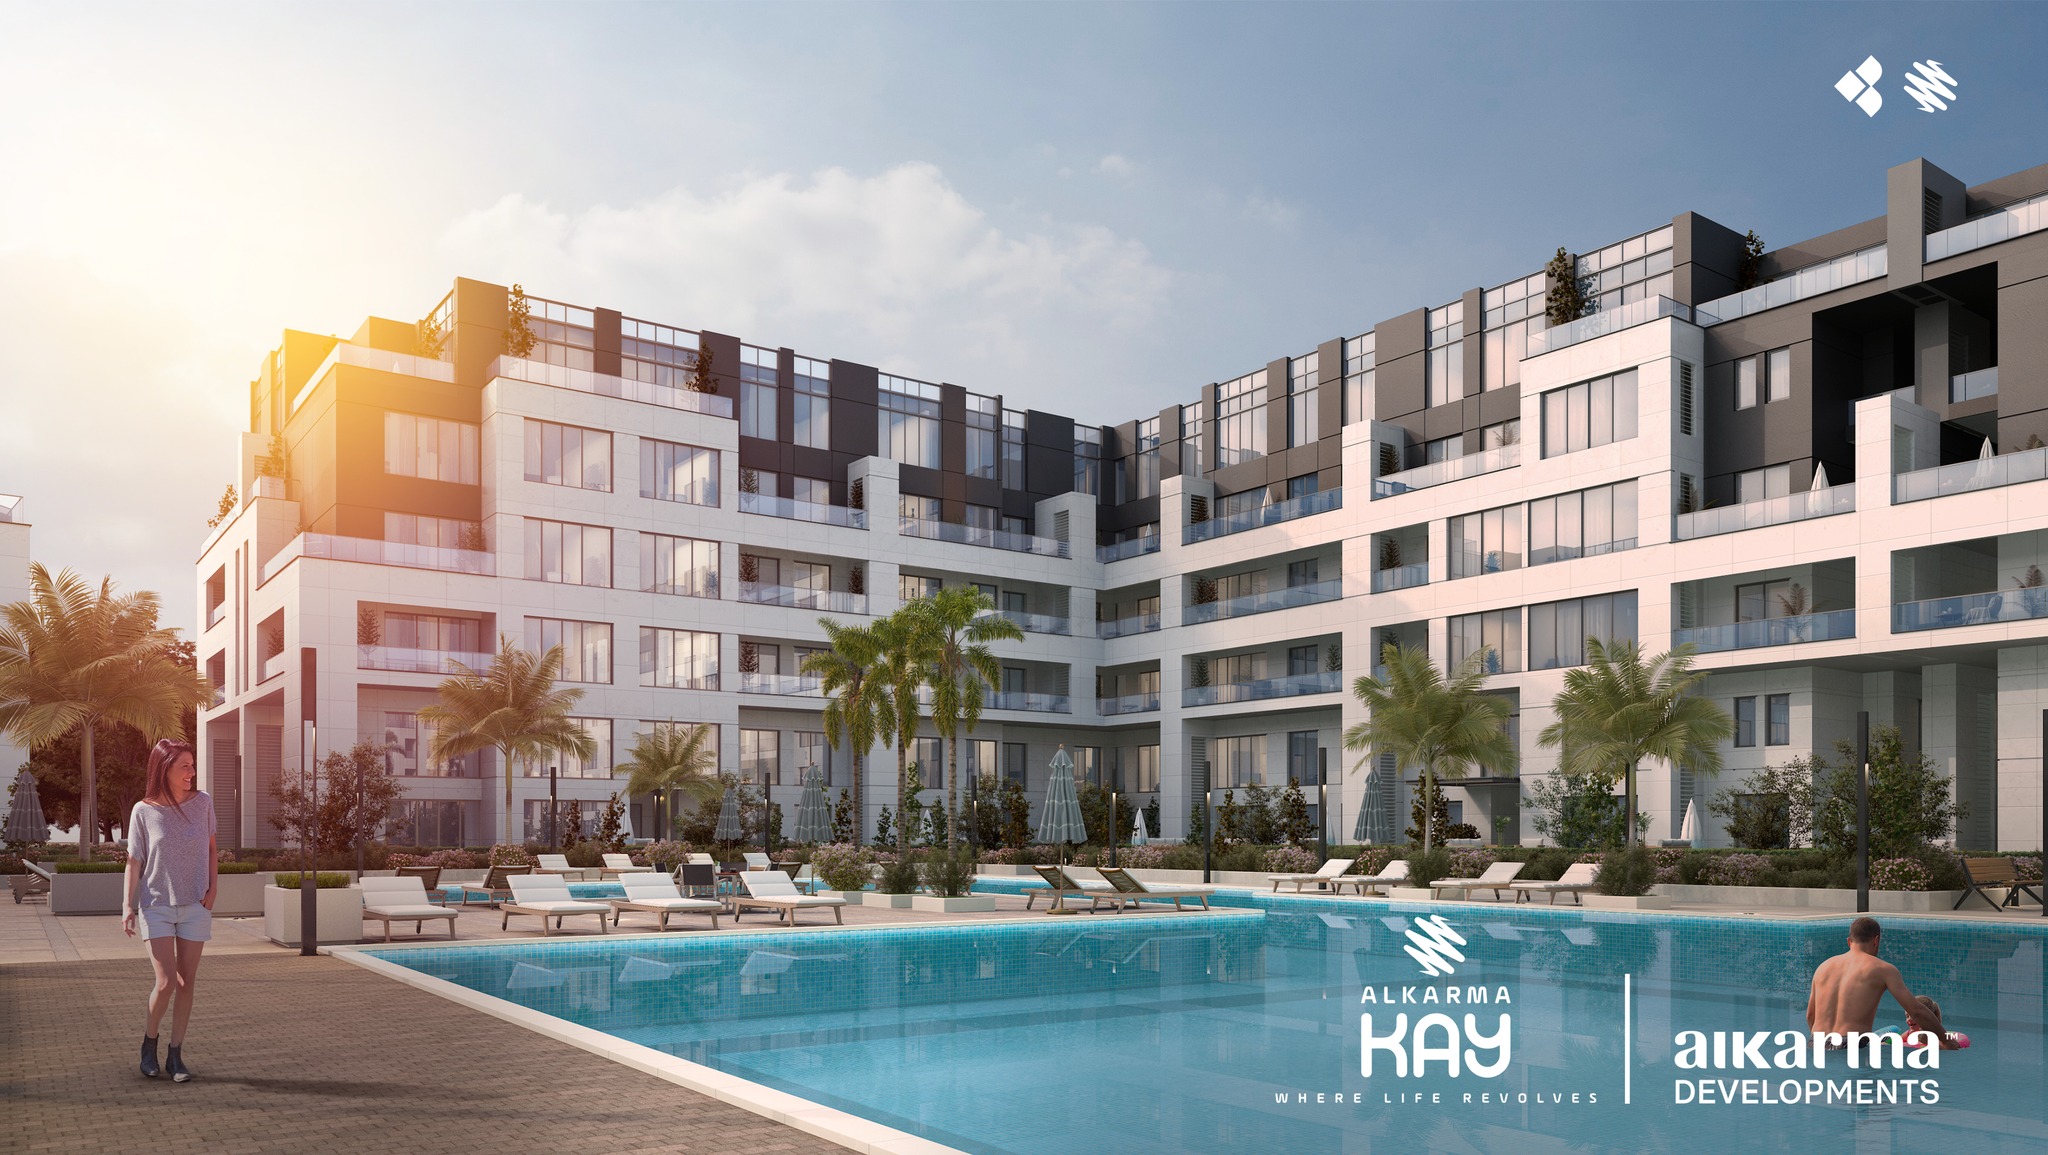 The Lowest Price For An Apartment in Sheikh Zayed at Alkarma Kay project